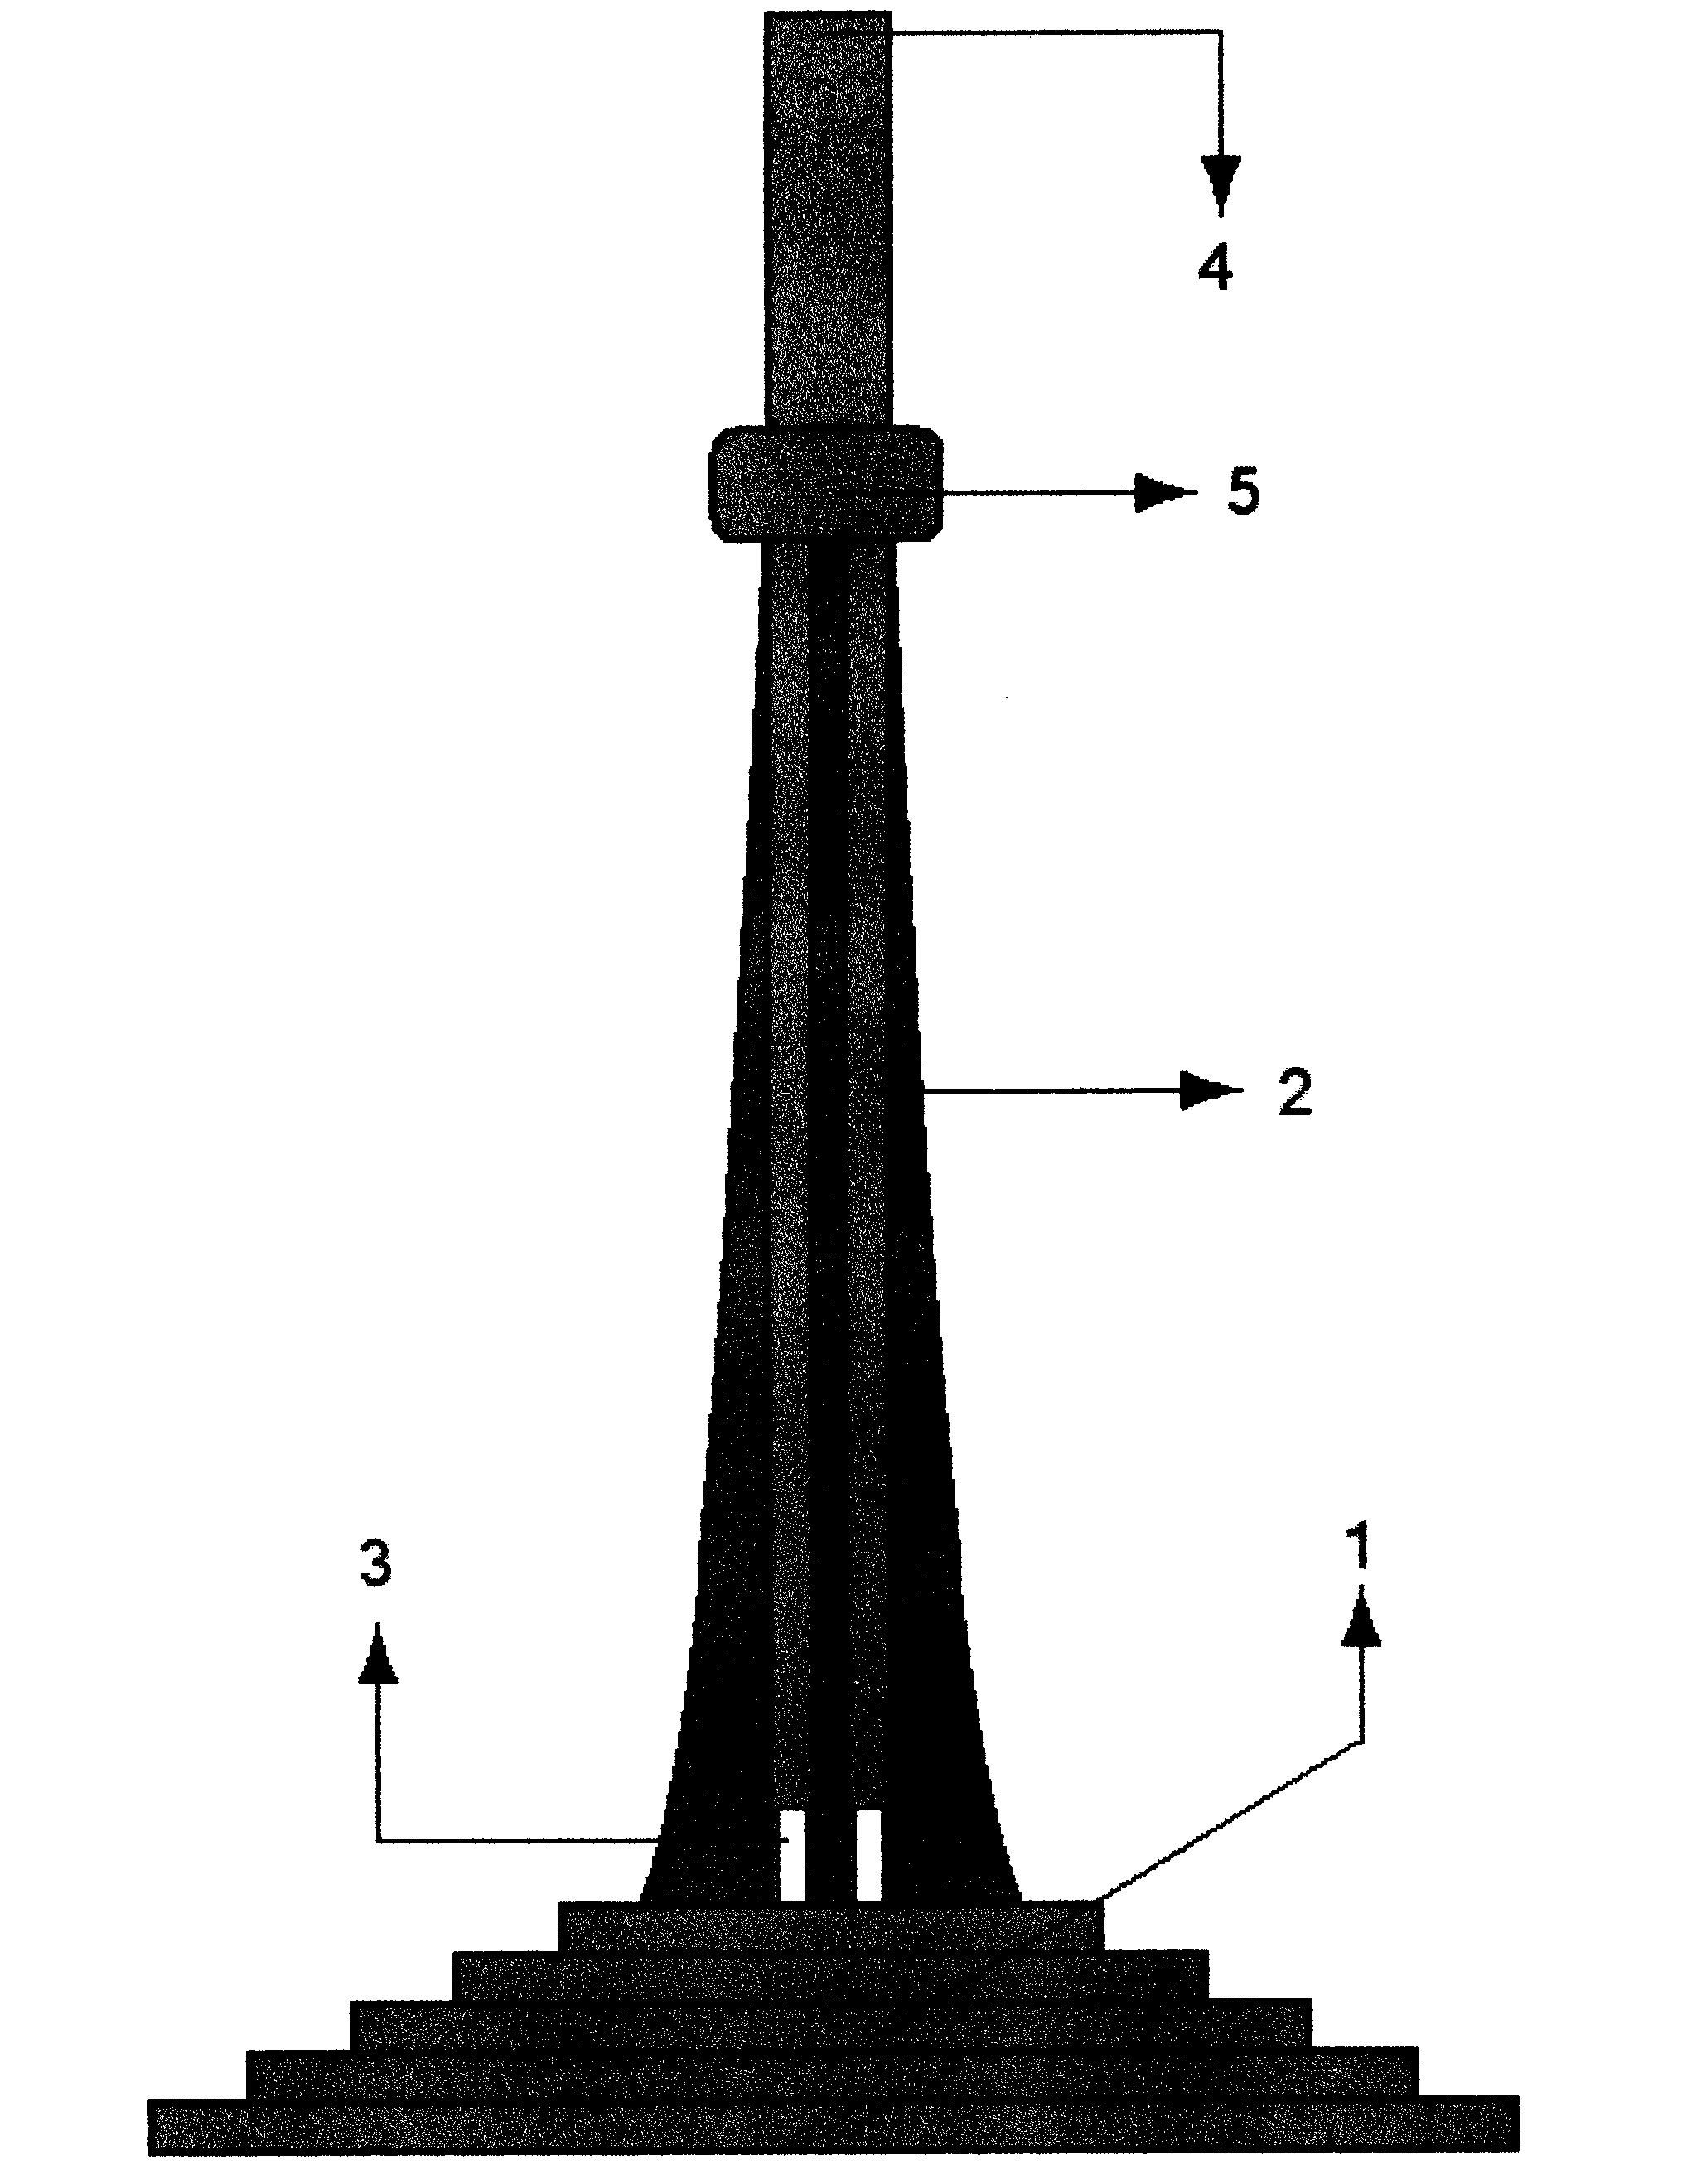 Method and equipment for carrying out air conditioning on natural environment by applying chimney type air guide tower